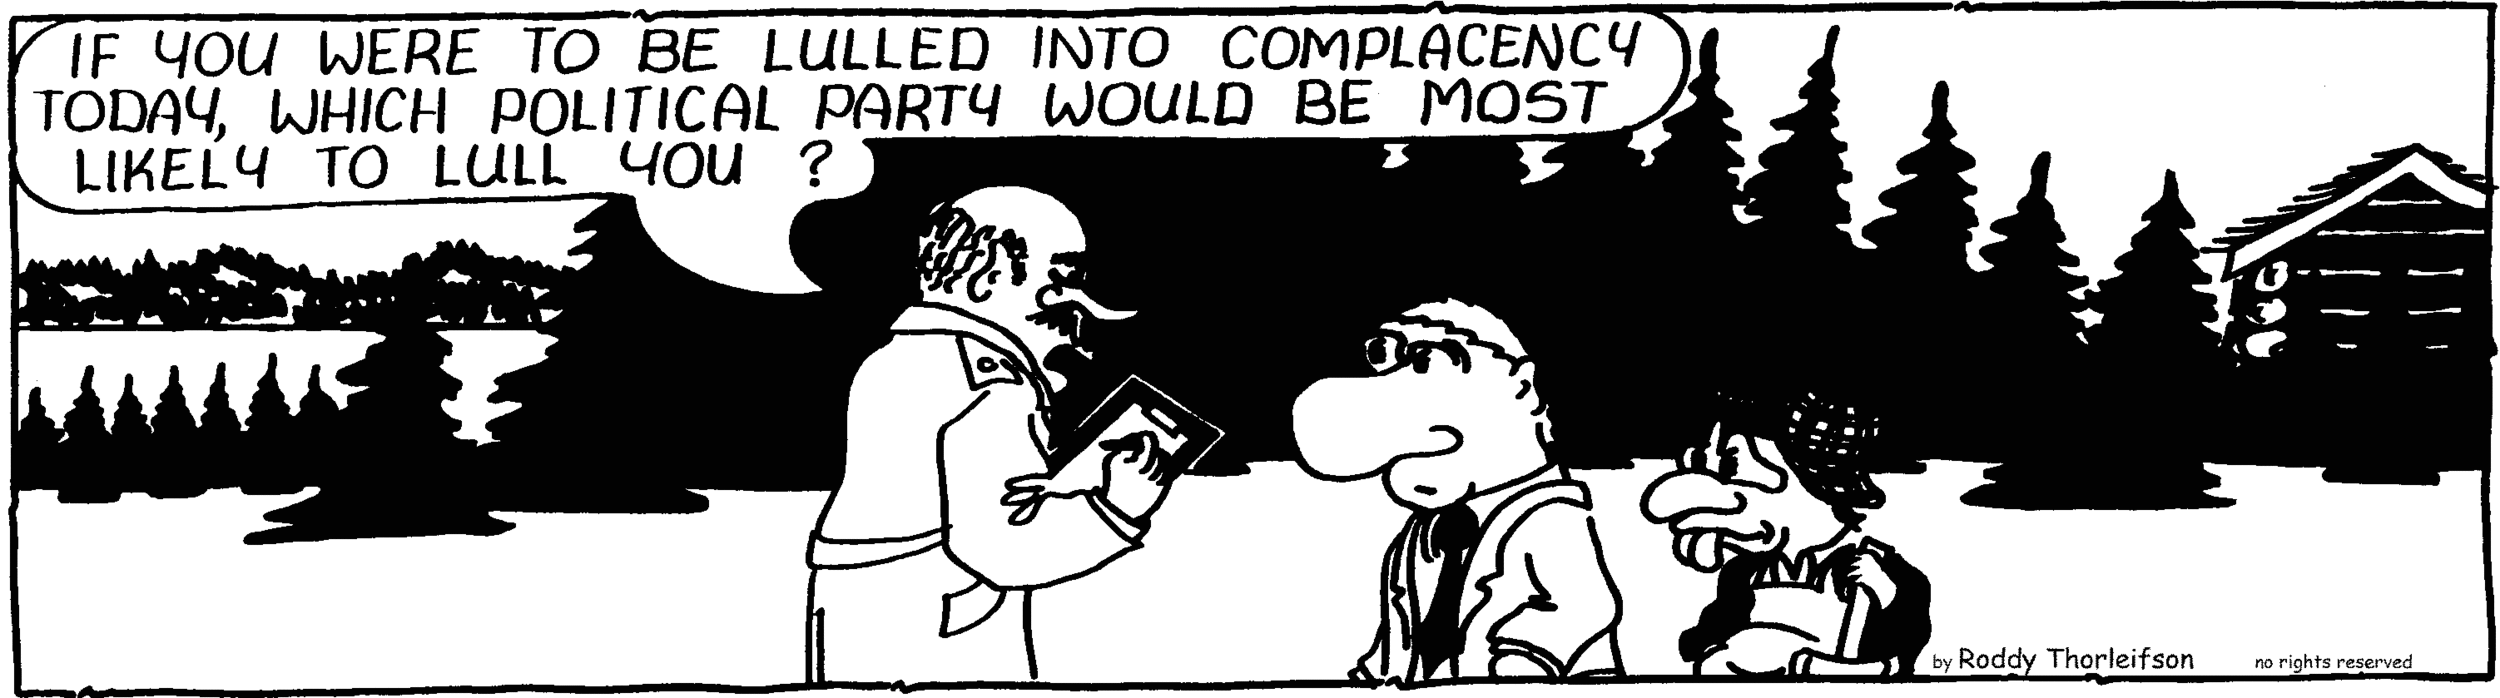 cartoon about polls and complacency